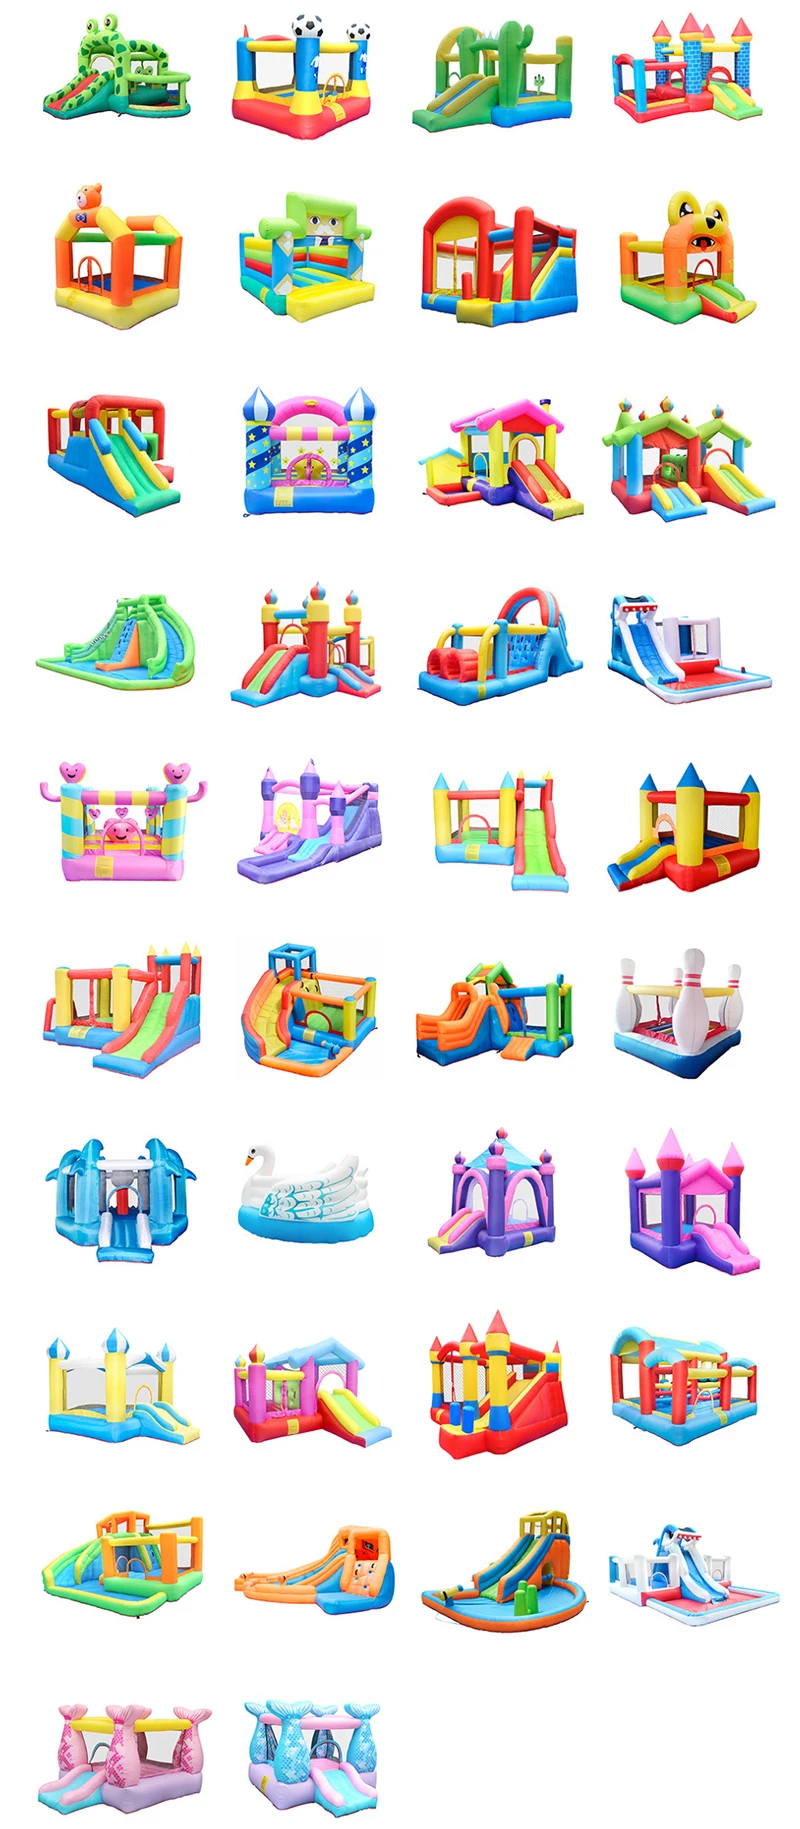 Kids Bounce House Inflatable Houses for Kids - Best Baby Jumpers and Bouncers Children's Bouncy Castle